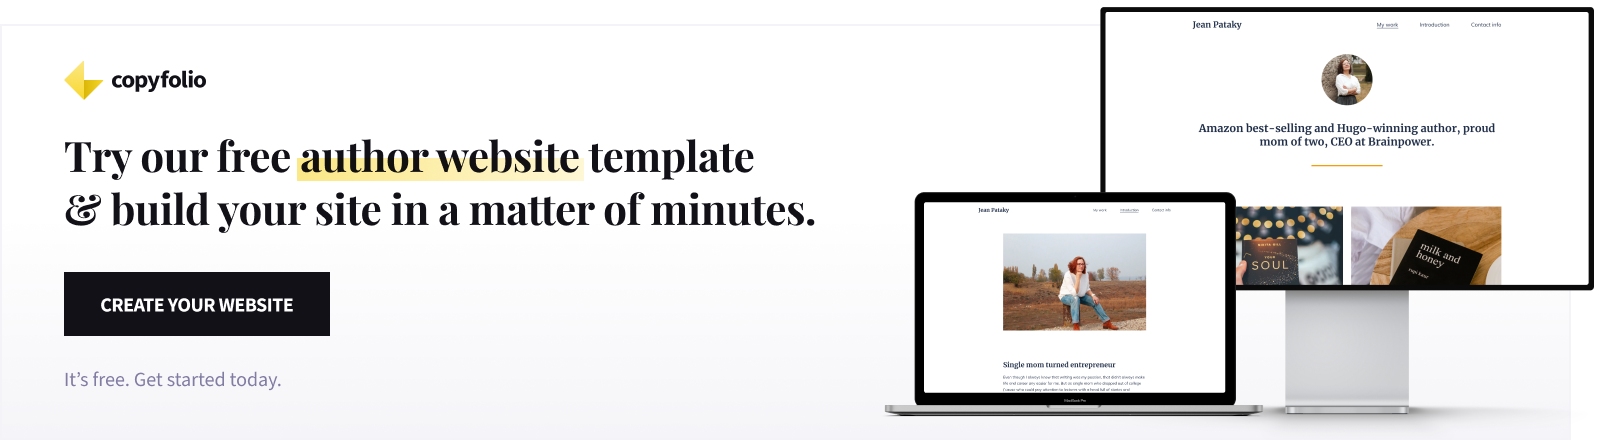 Try our free author website template & build your site in a matter of minutes.